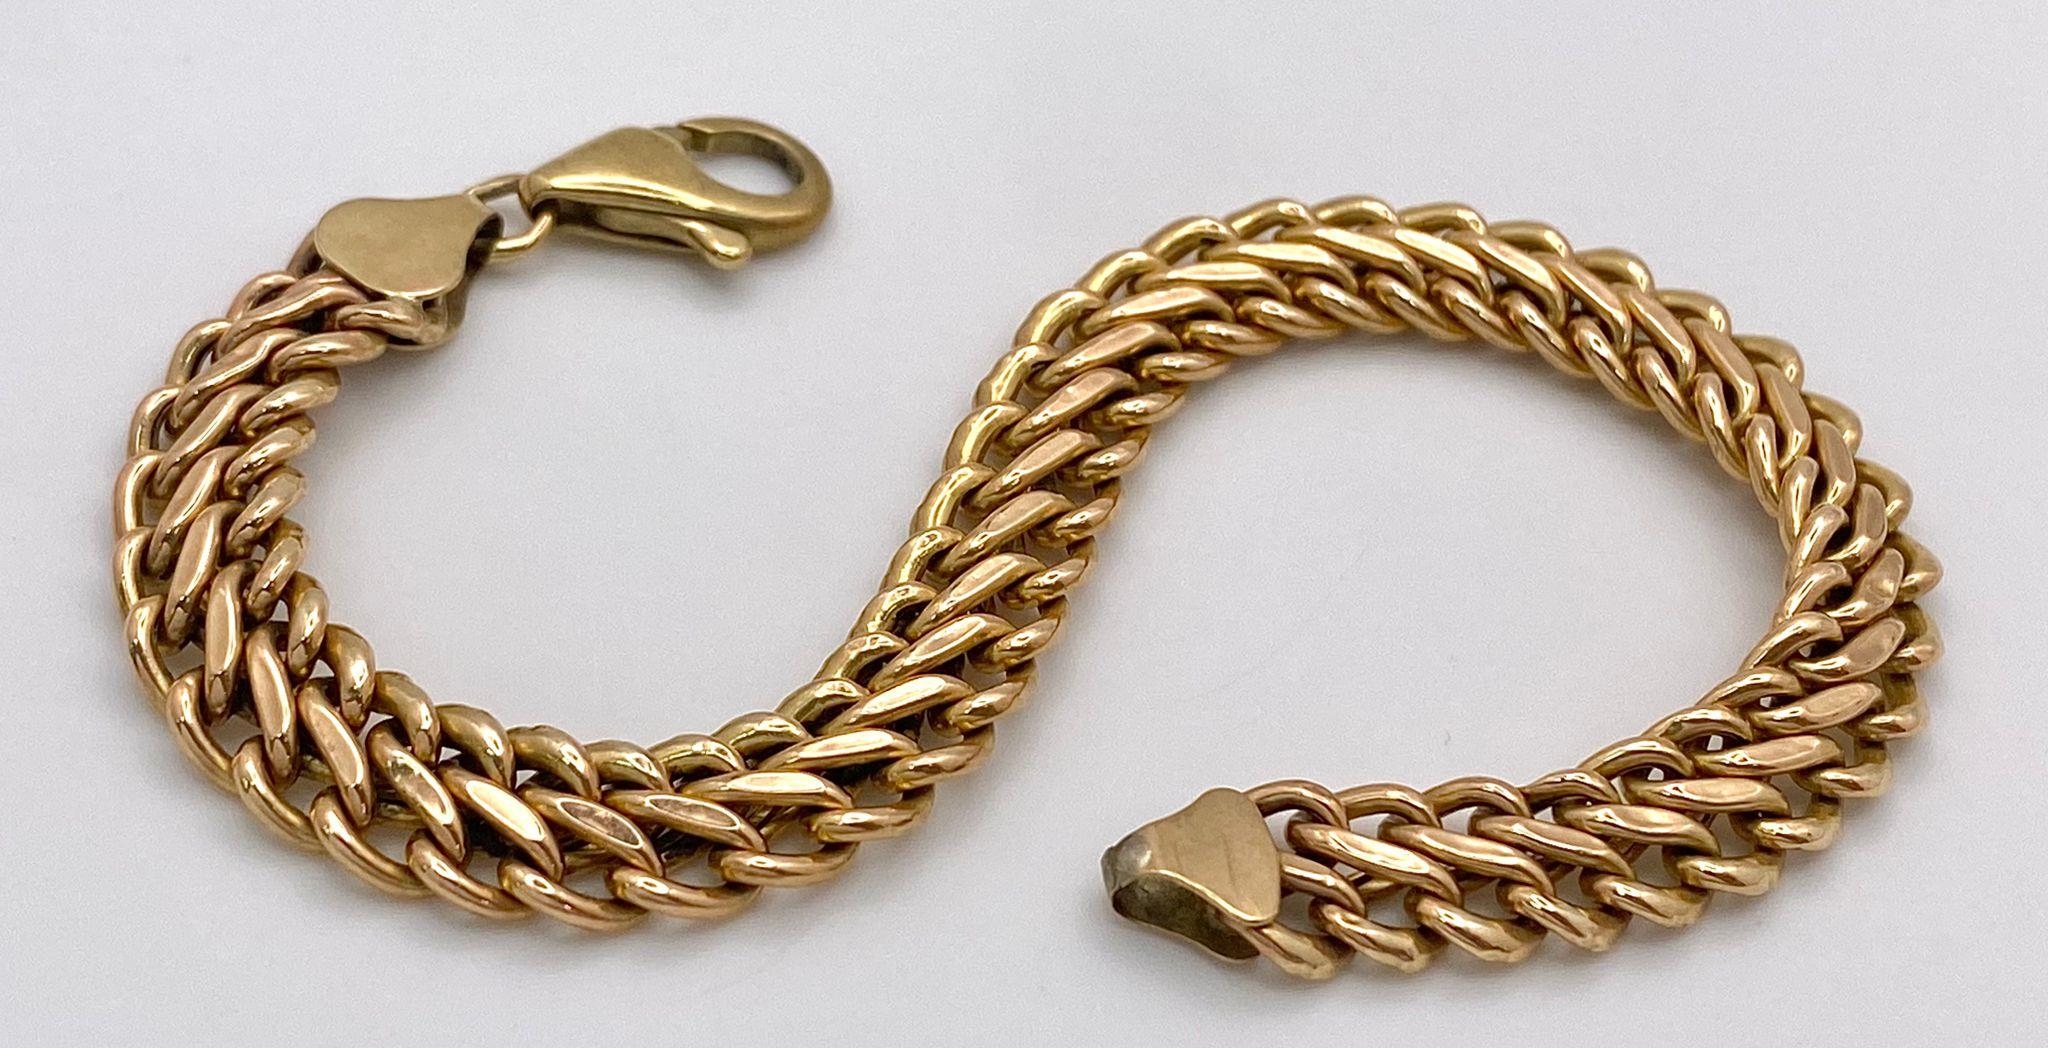 A 9K Yellow Gold Double Curb Link Bracelet. 18cm. 7.74g weight. - Image 3 of 6